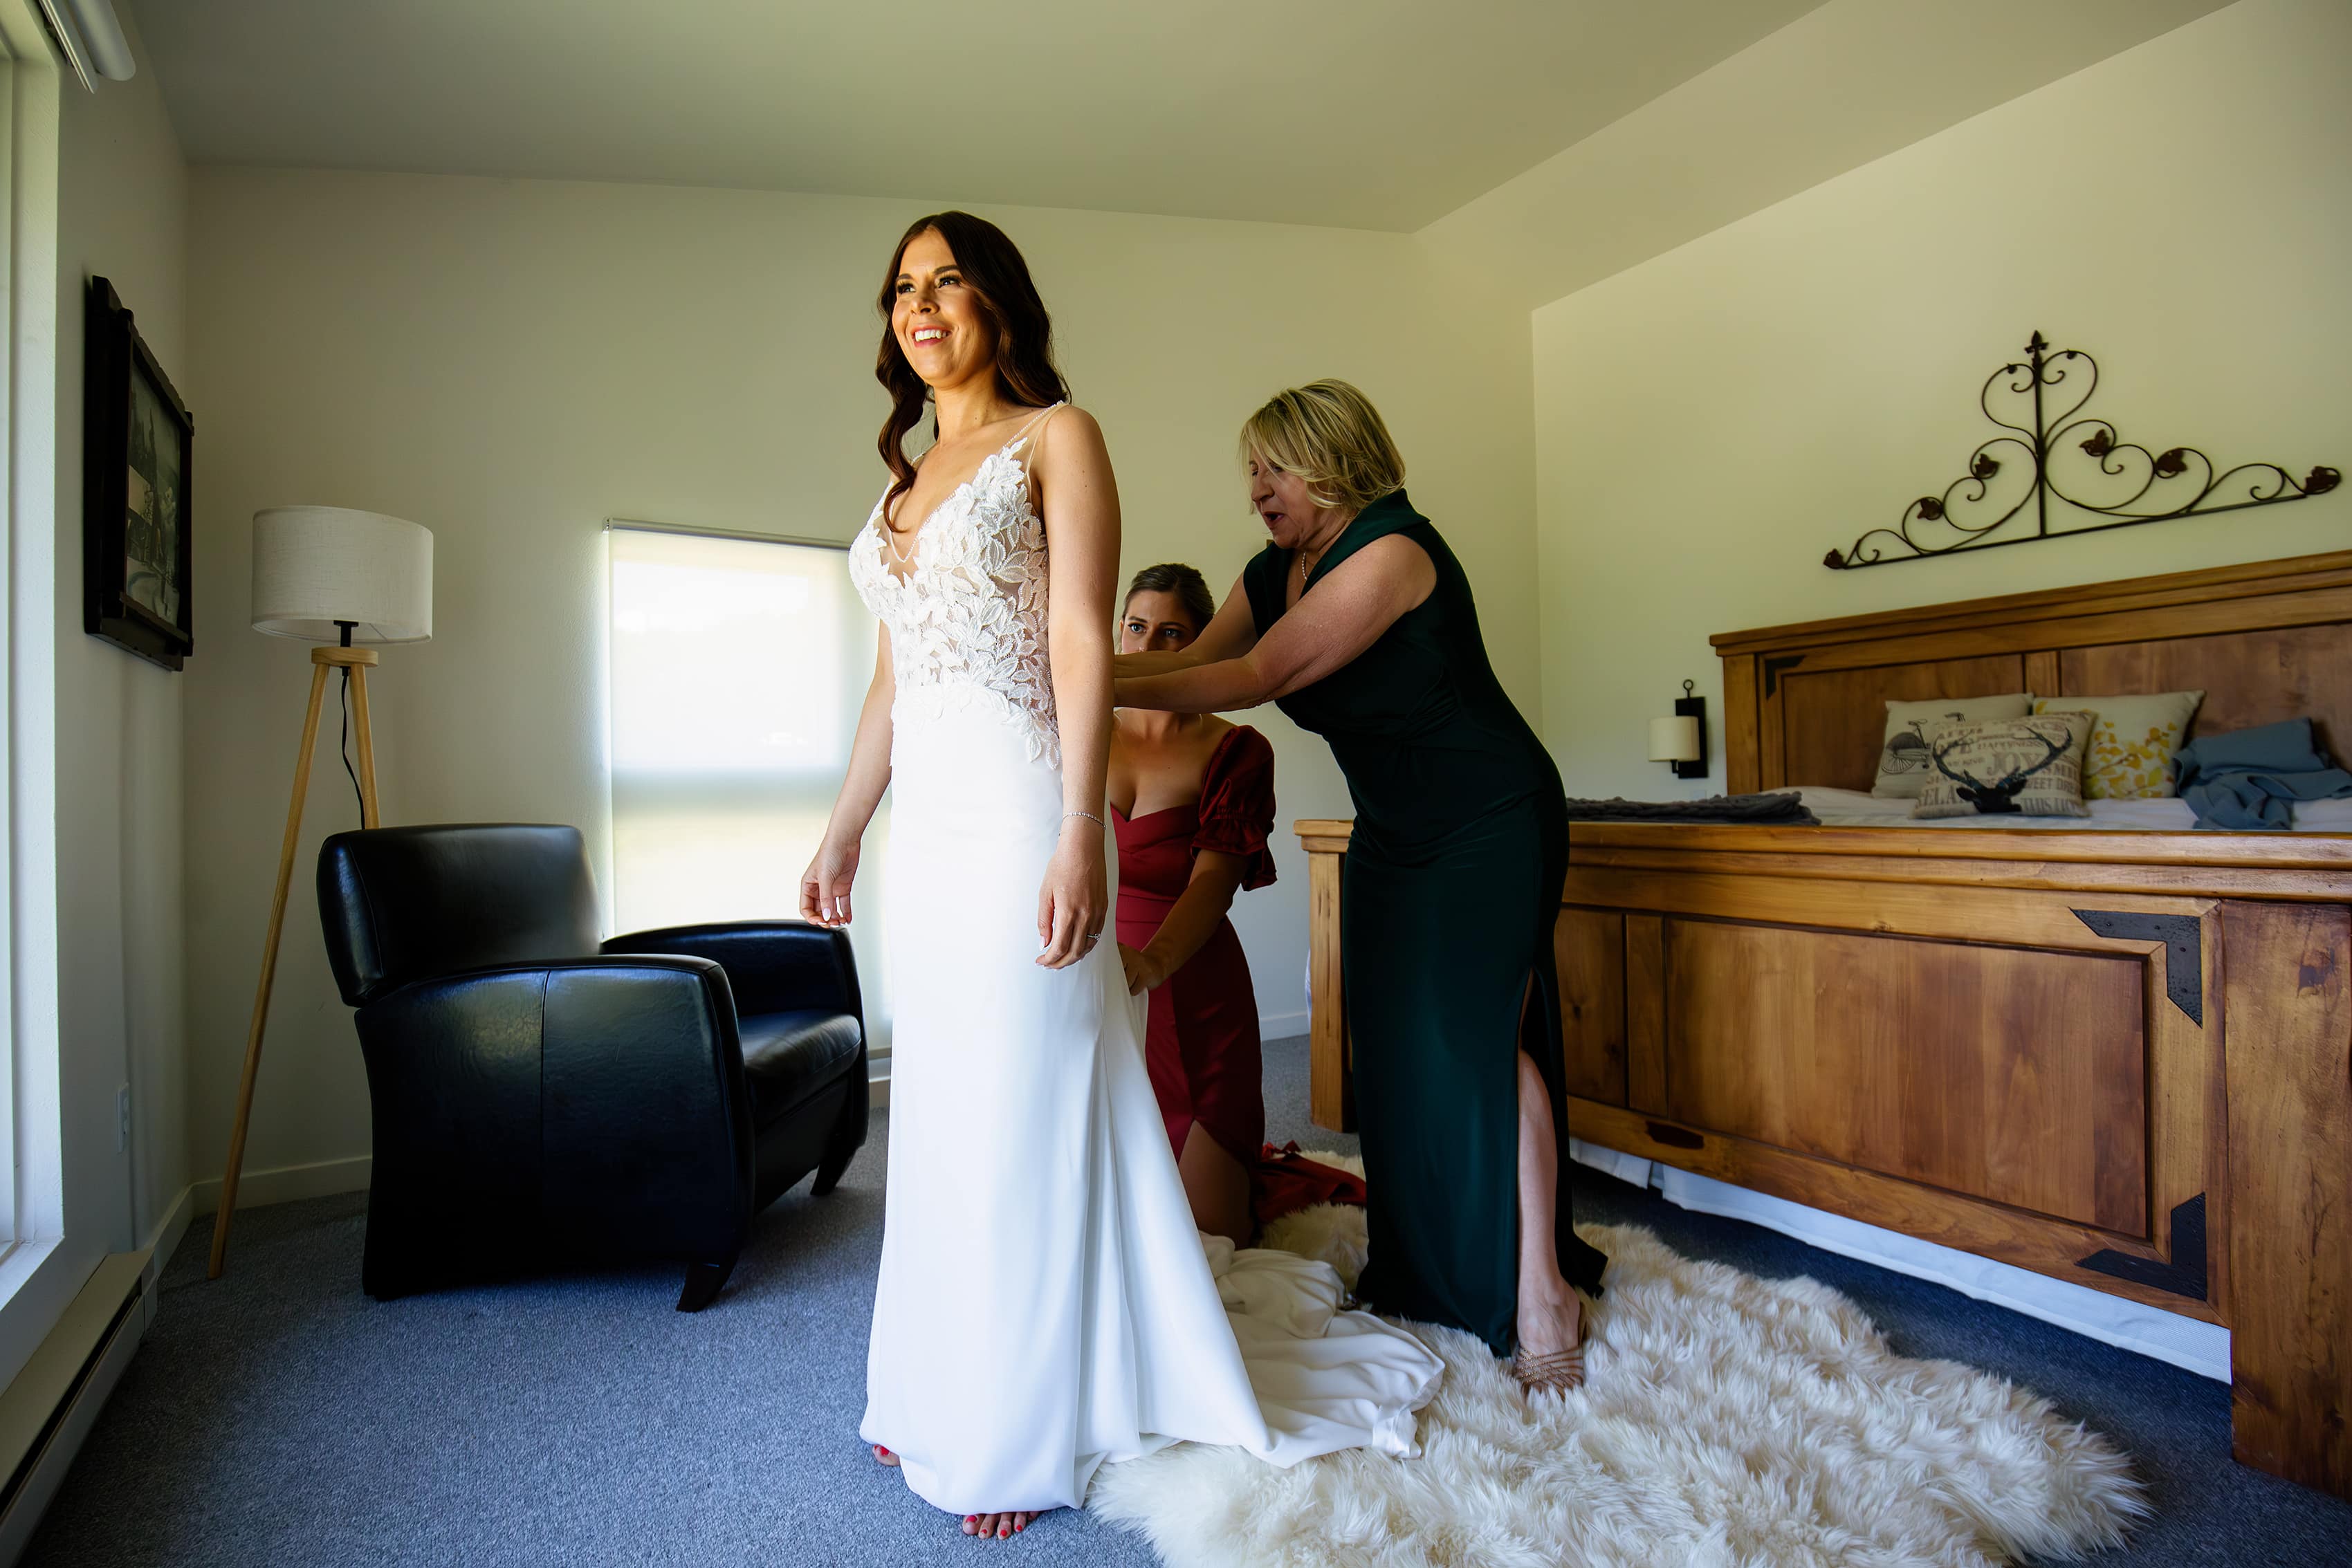 The bride gets into her gown